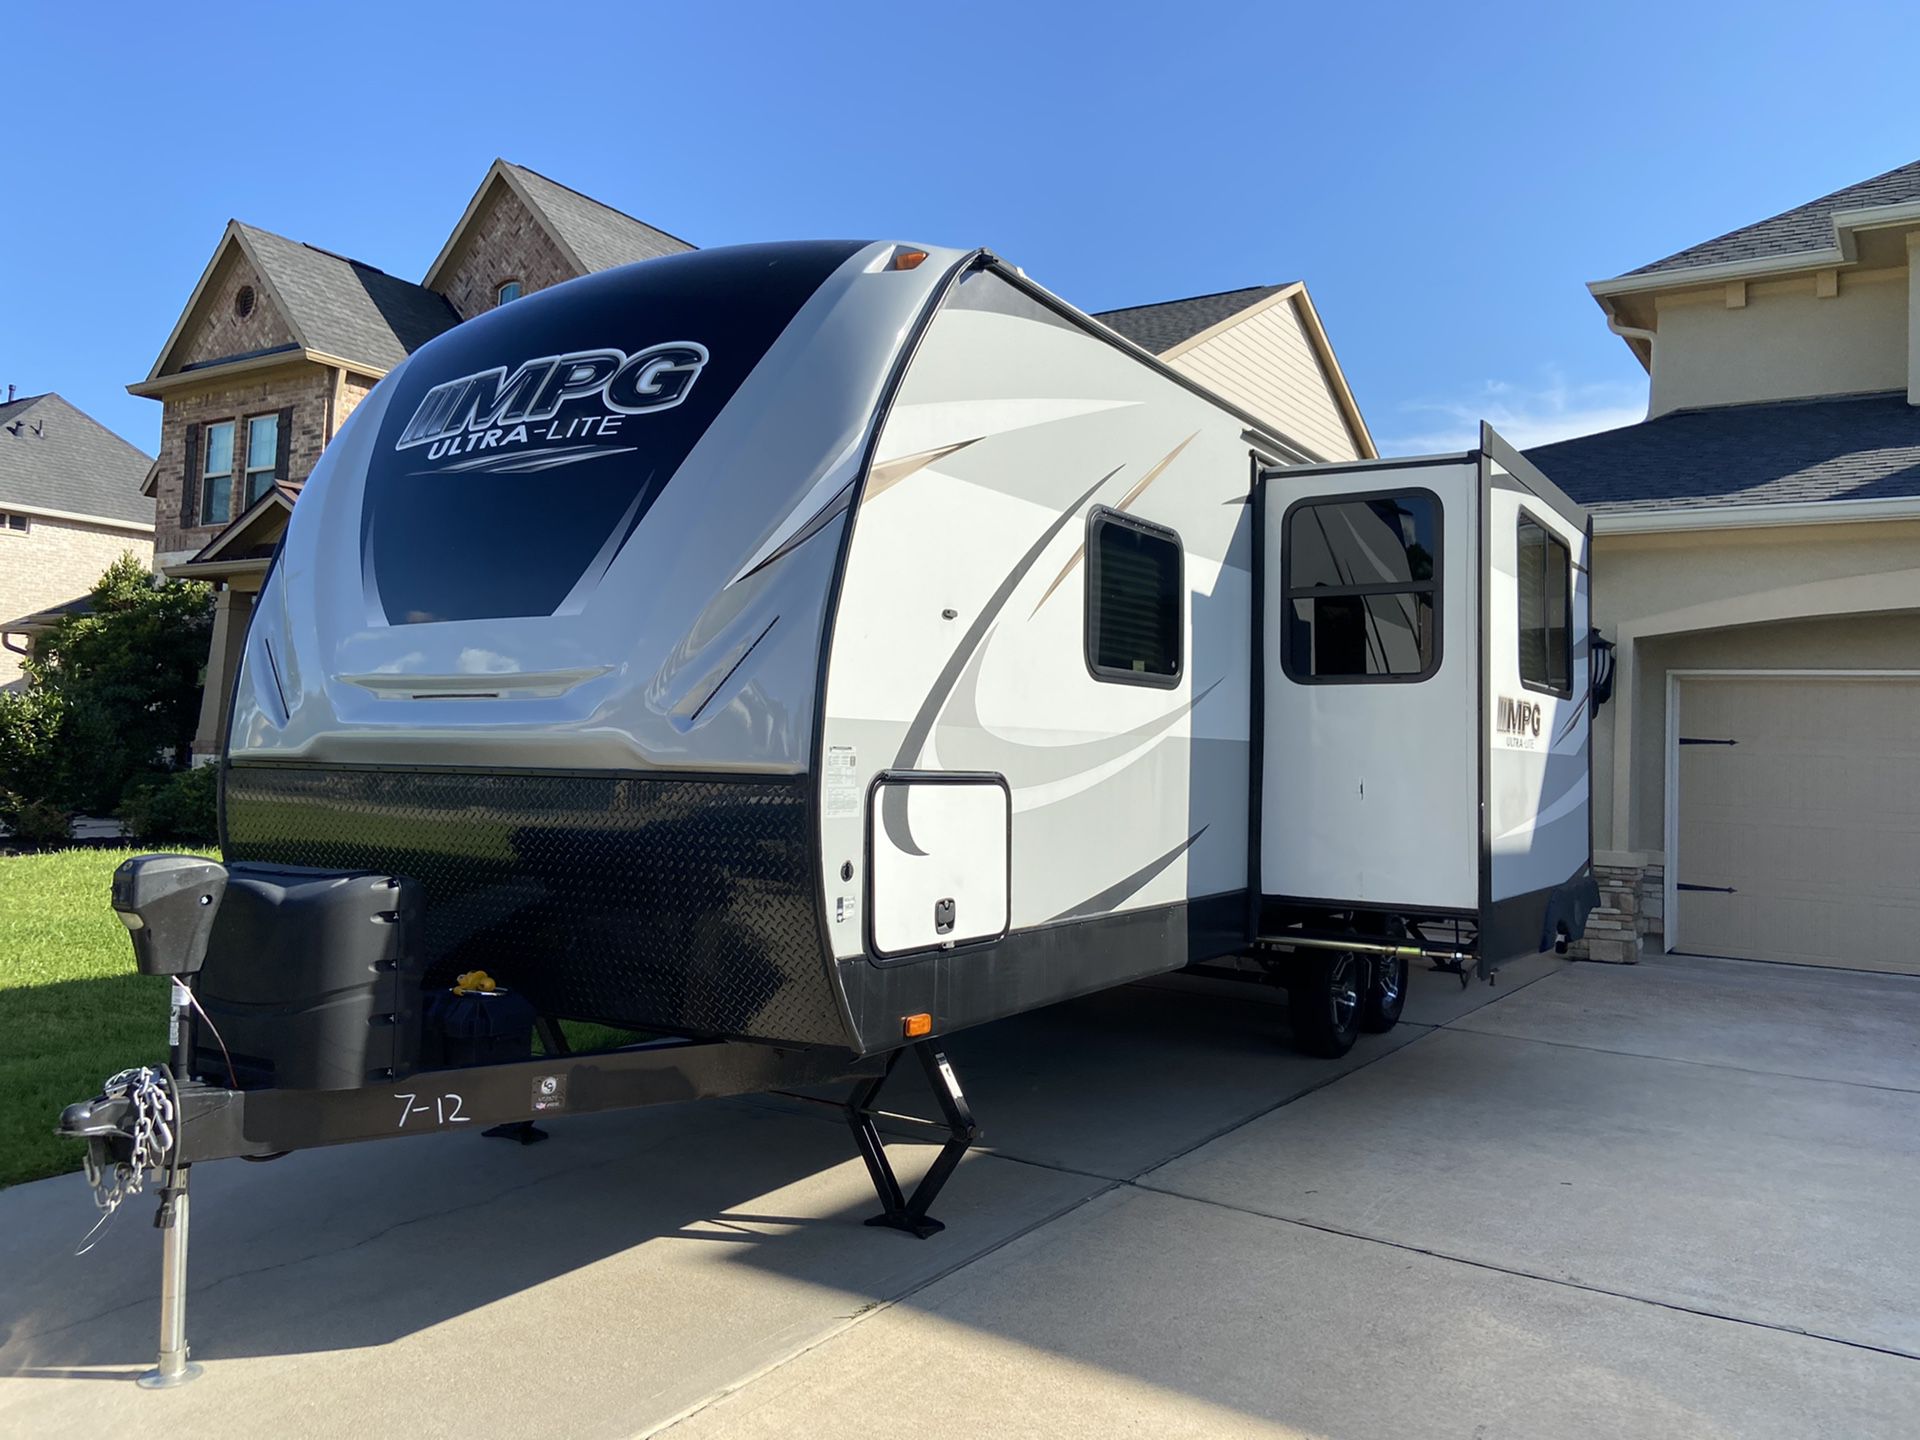 2019 - MPG Cruiser 2400BH in excellent condition 8’x29’ cash only